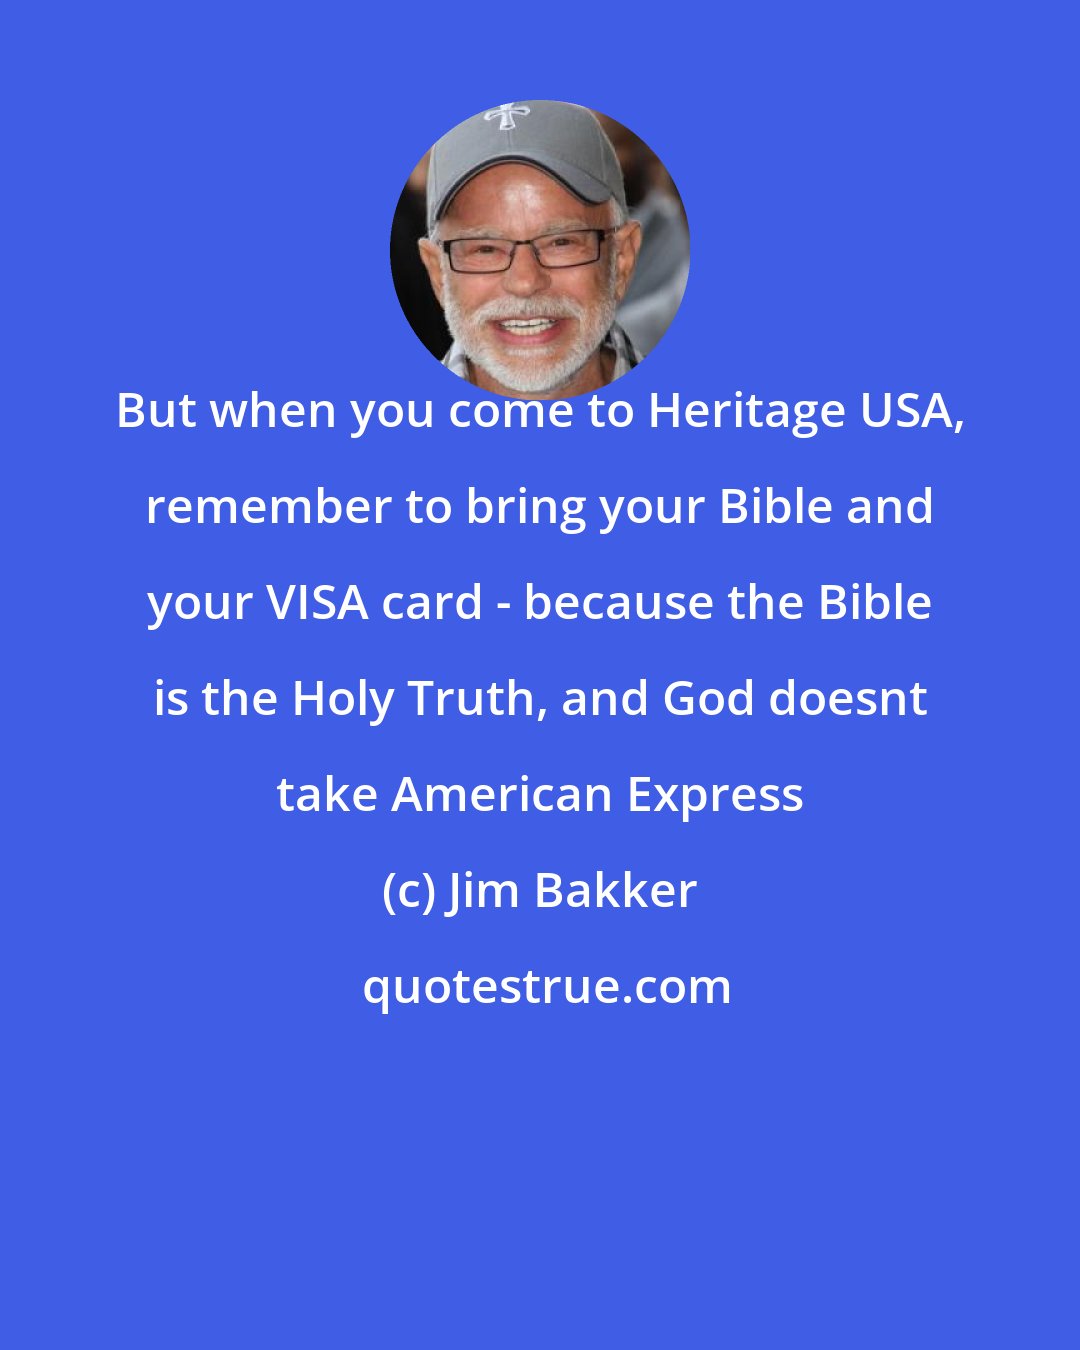 Jim Bakker: But when you come to Heritage USA, remember to bring your Bible and your VISA card - because the Bible is the Holy Truth, and God doesnt take American Express